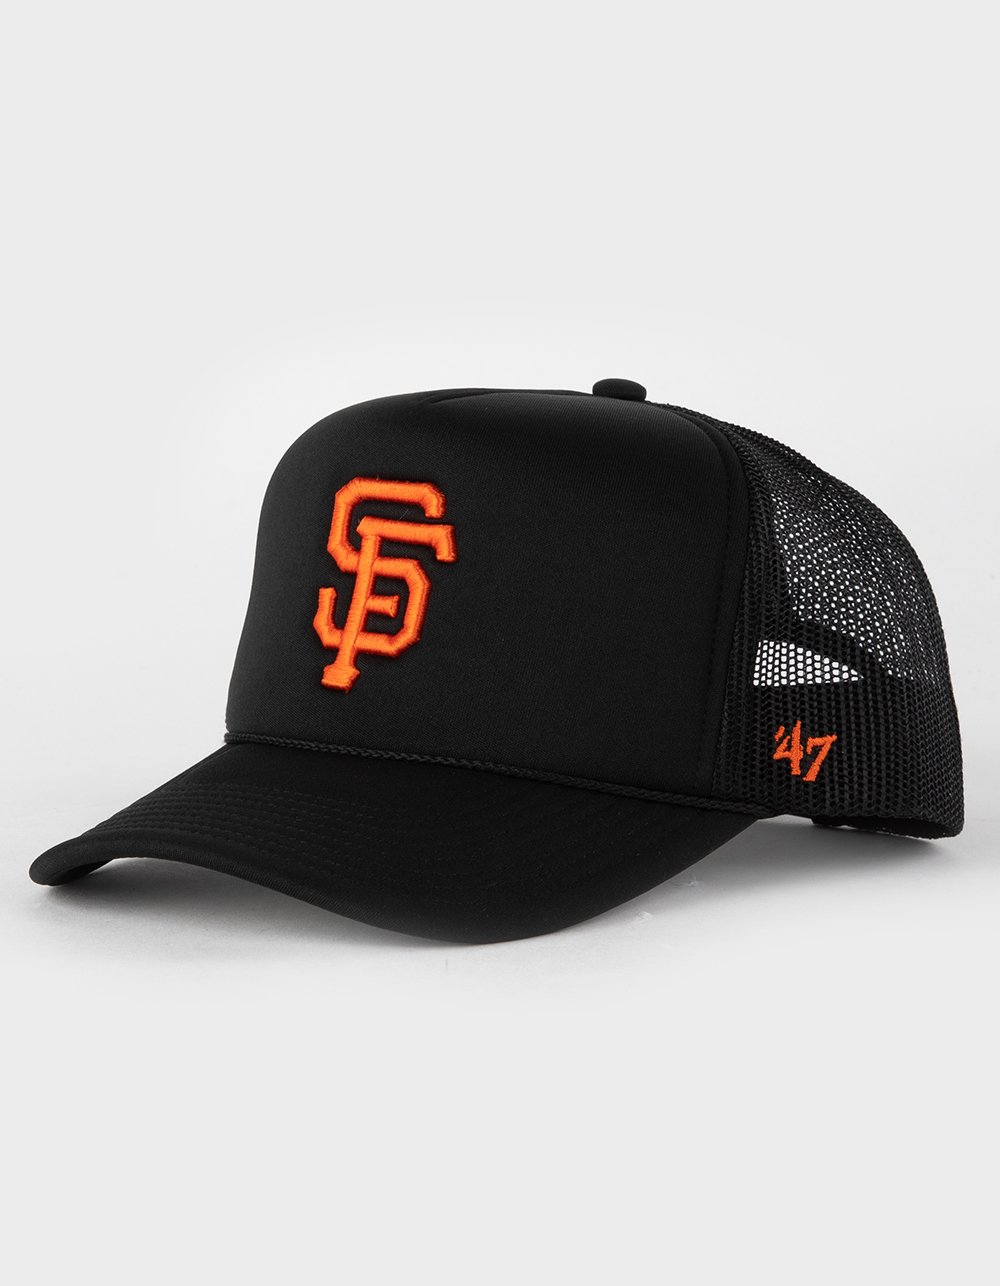 47 Brand Shoe Palace Exclusive San Francisco Giants Mens Trucker Hat (Brown)